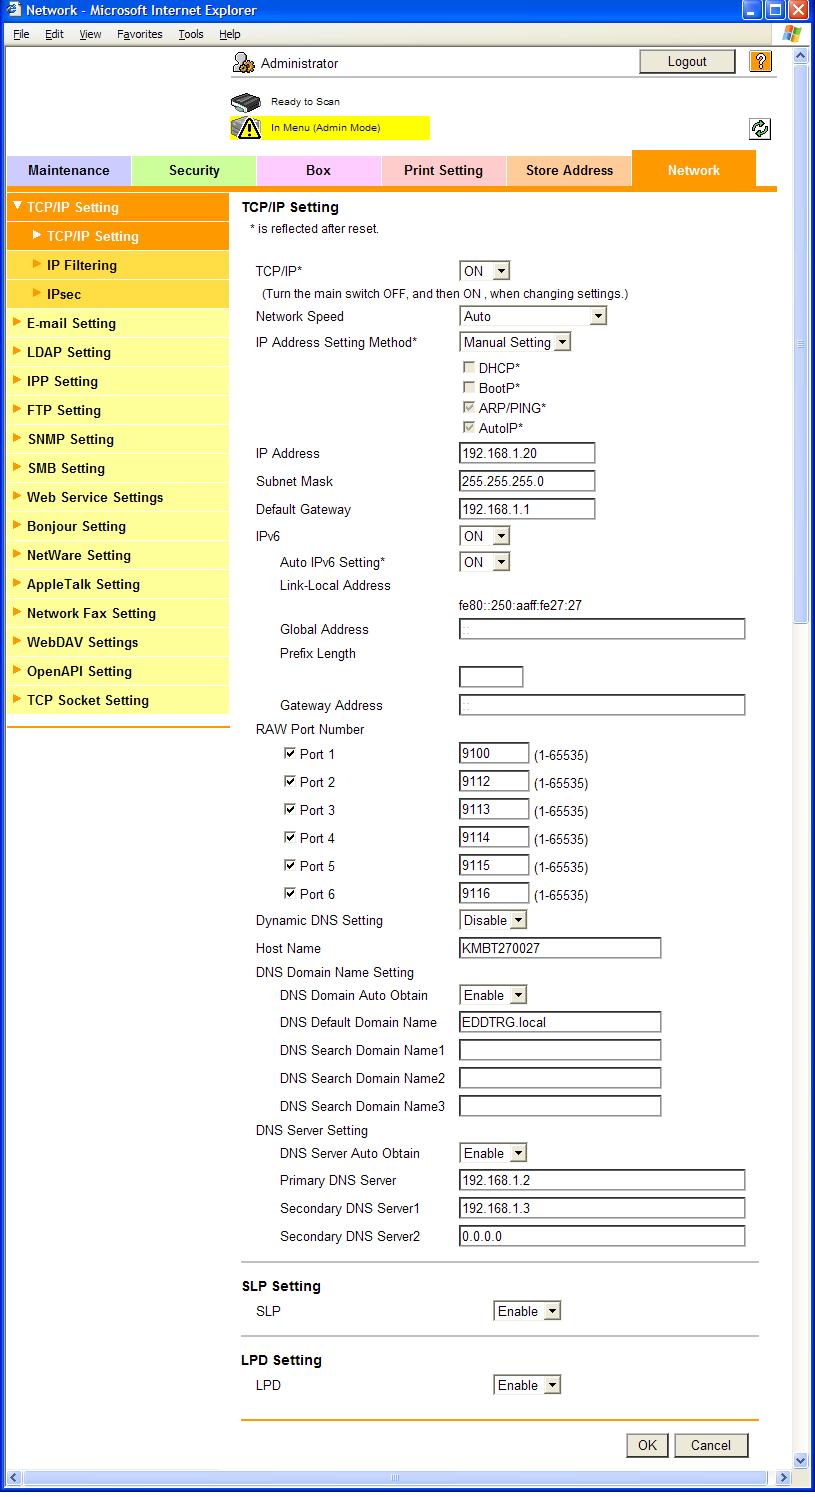 Web Connection 13 13.4.6 Network Item TCP/IP Setting E-Mail Setting LDAP Setting IPP Setting FTP Setting Description Specify the TCP/IP settings to connect the machine to the network.